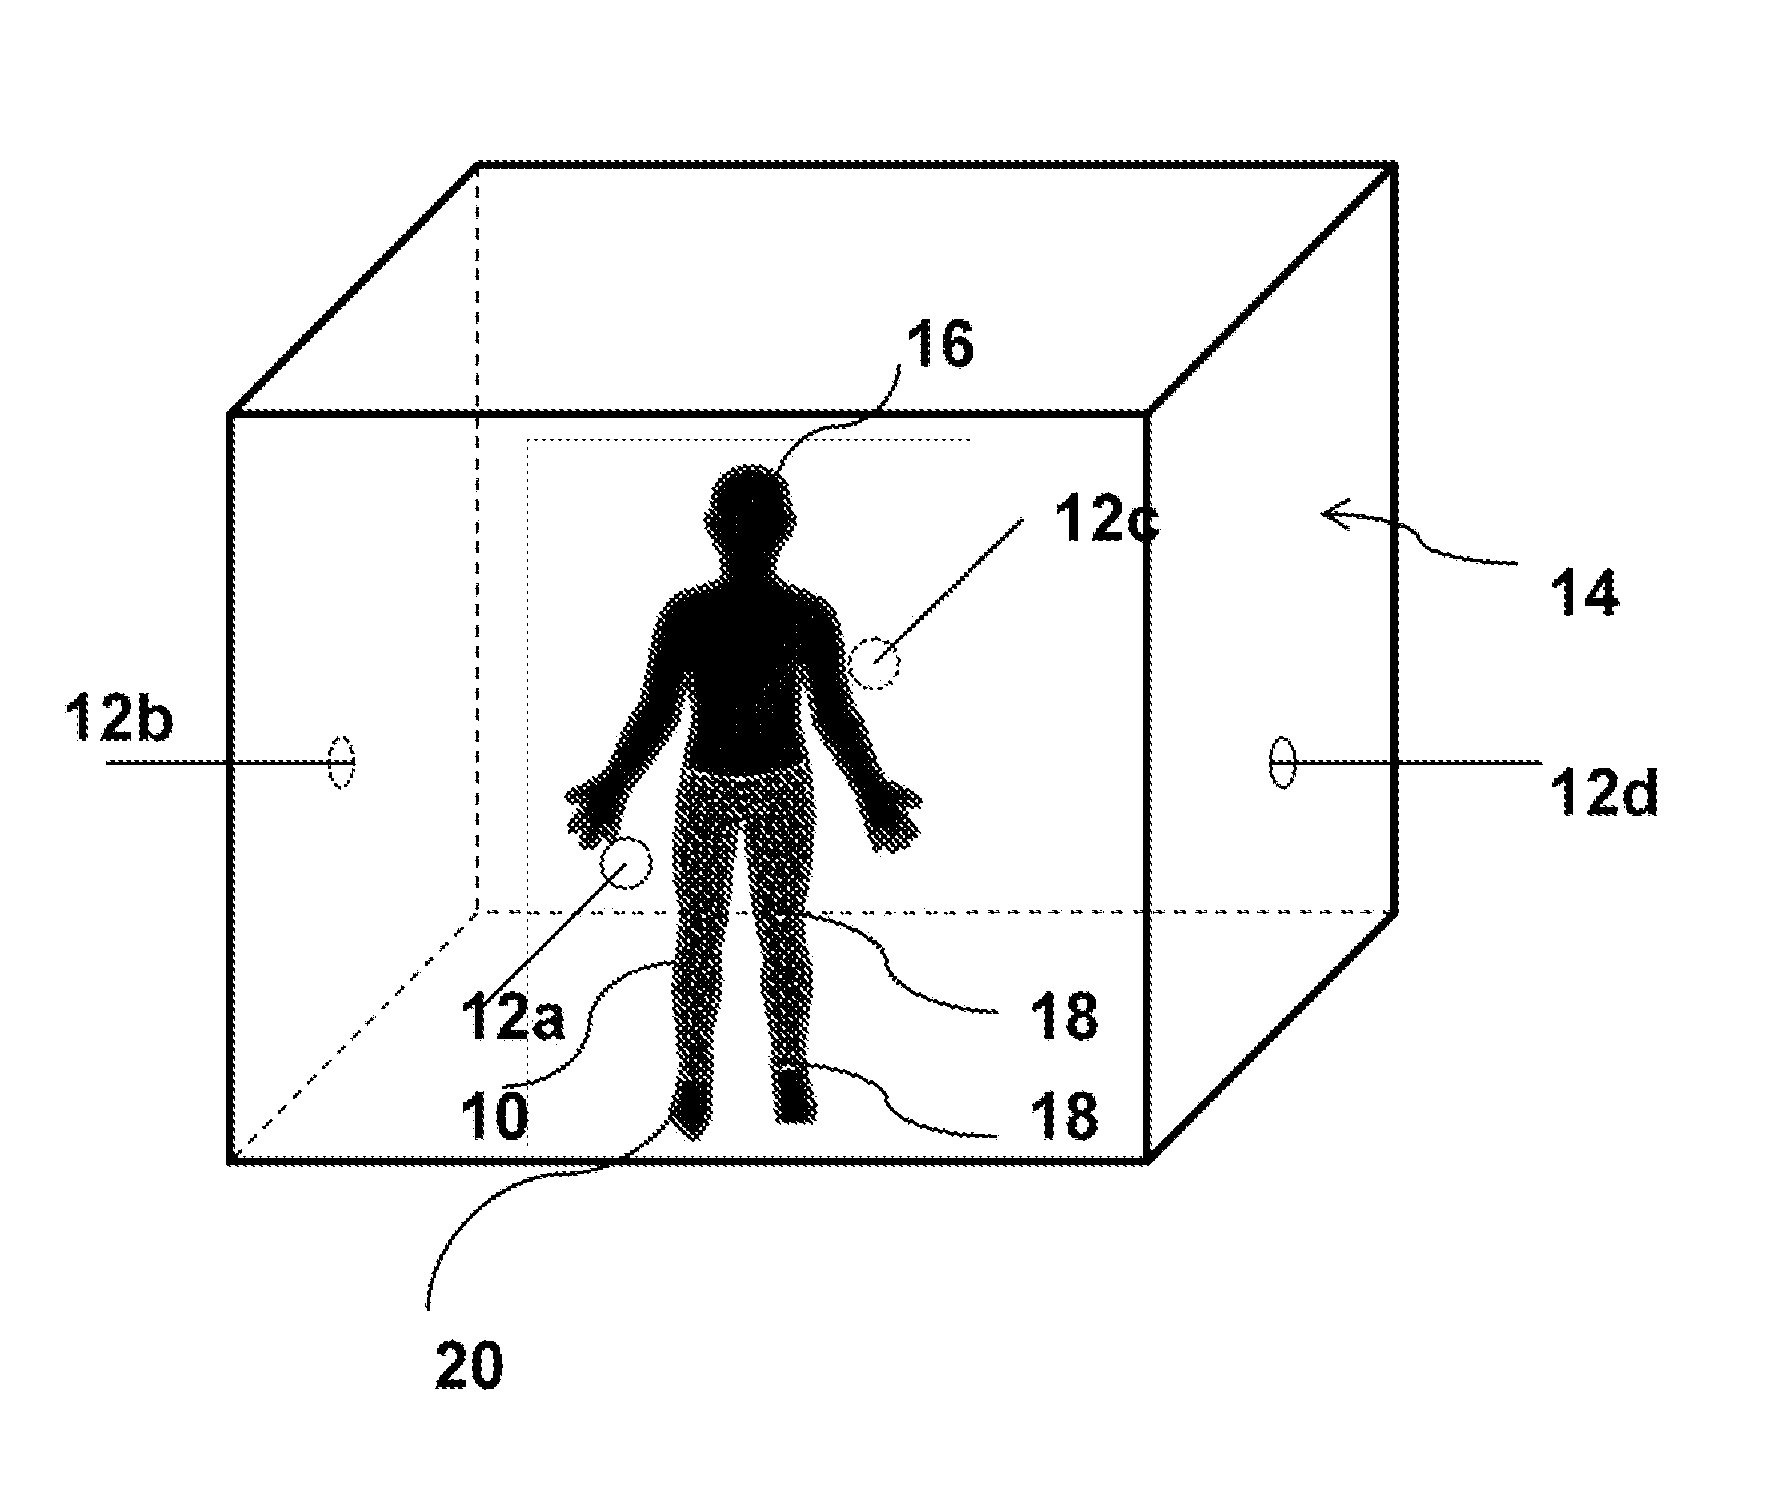 Method and apparatus to create 3-dimensional computer models of persons from specially created 2-dimensional images